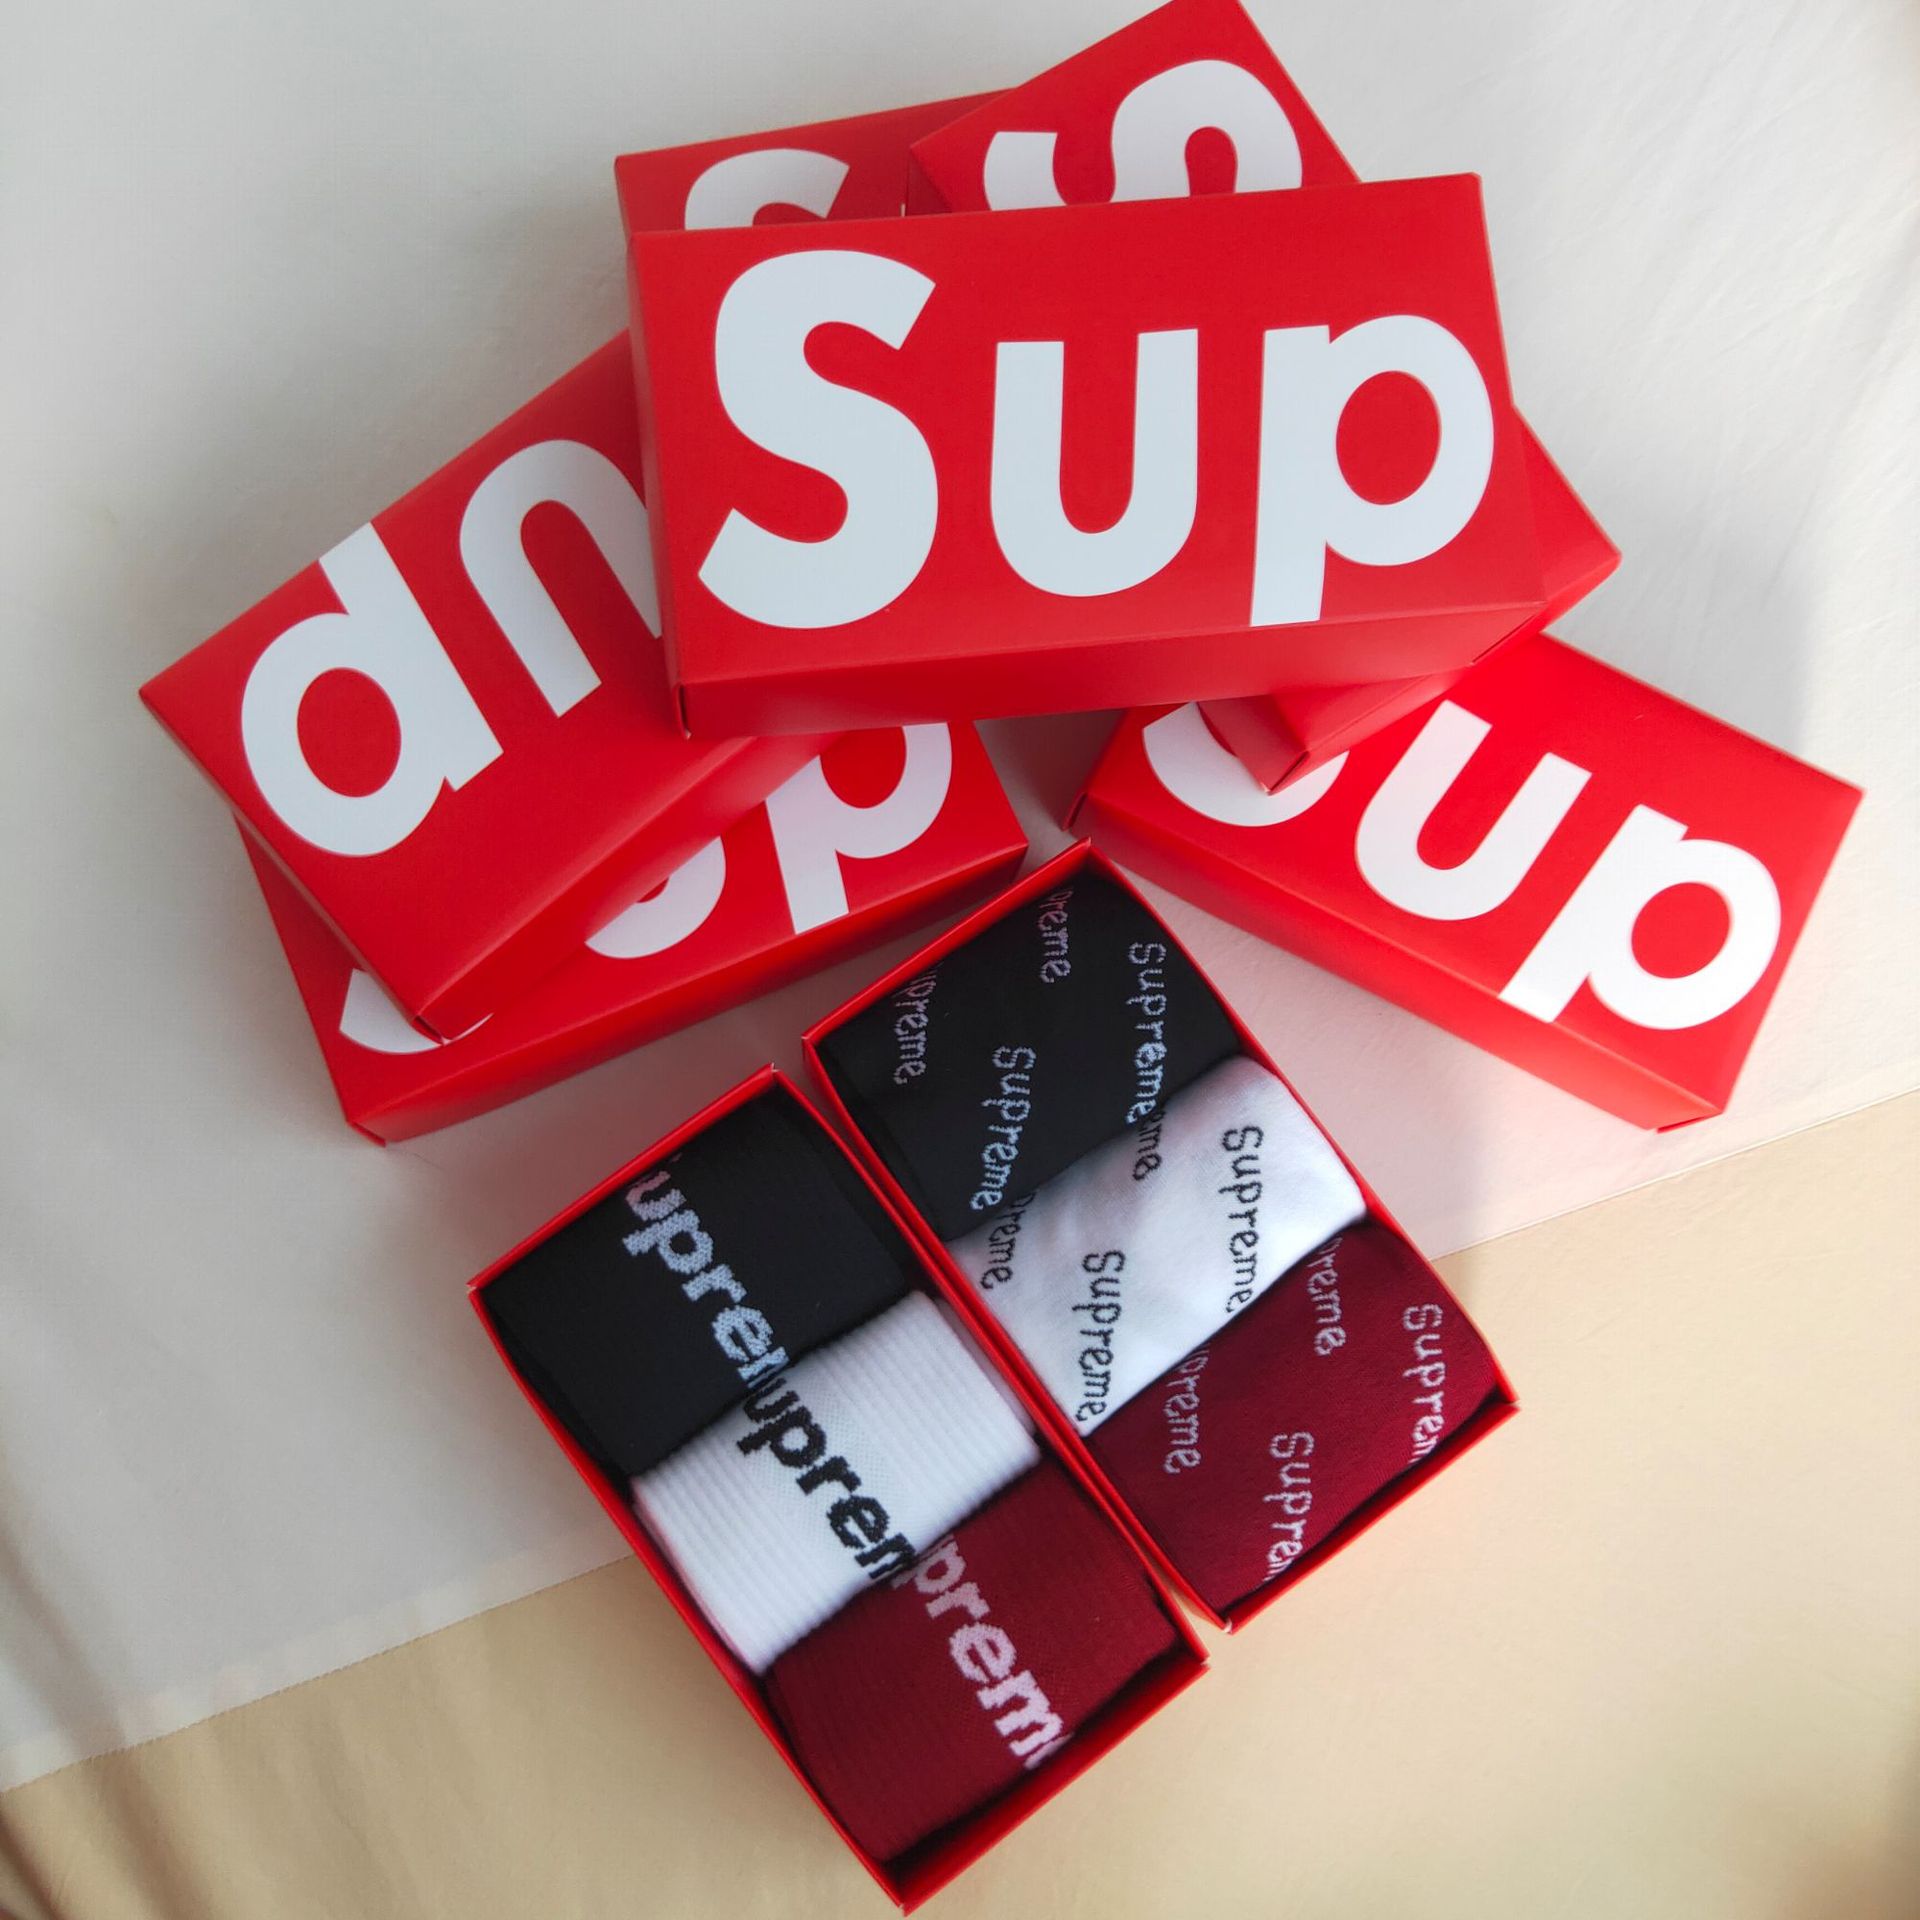 Boxed Supreme socks for men and women wi...